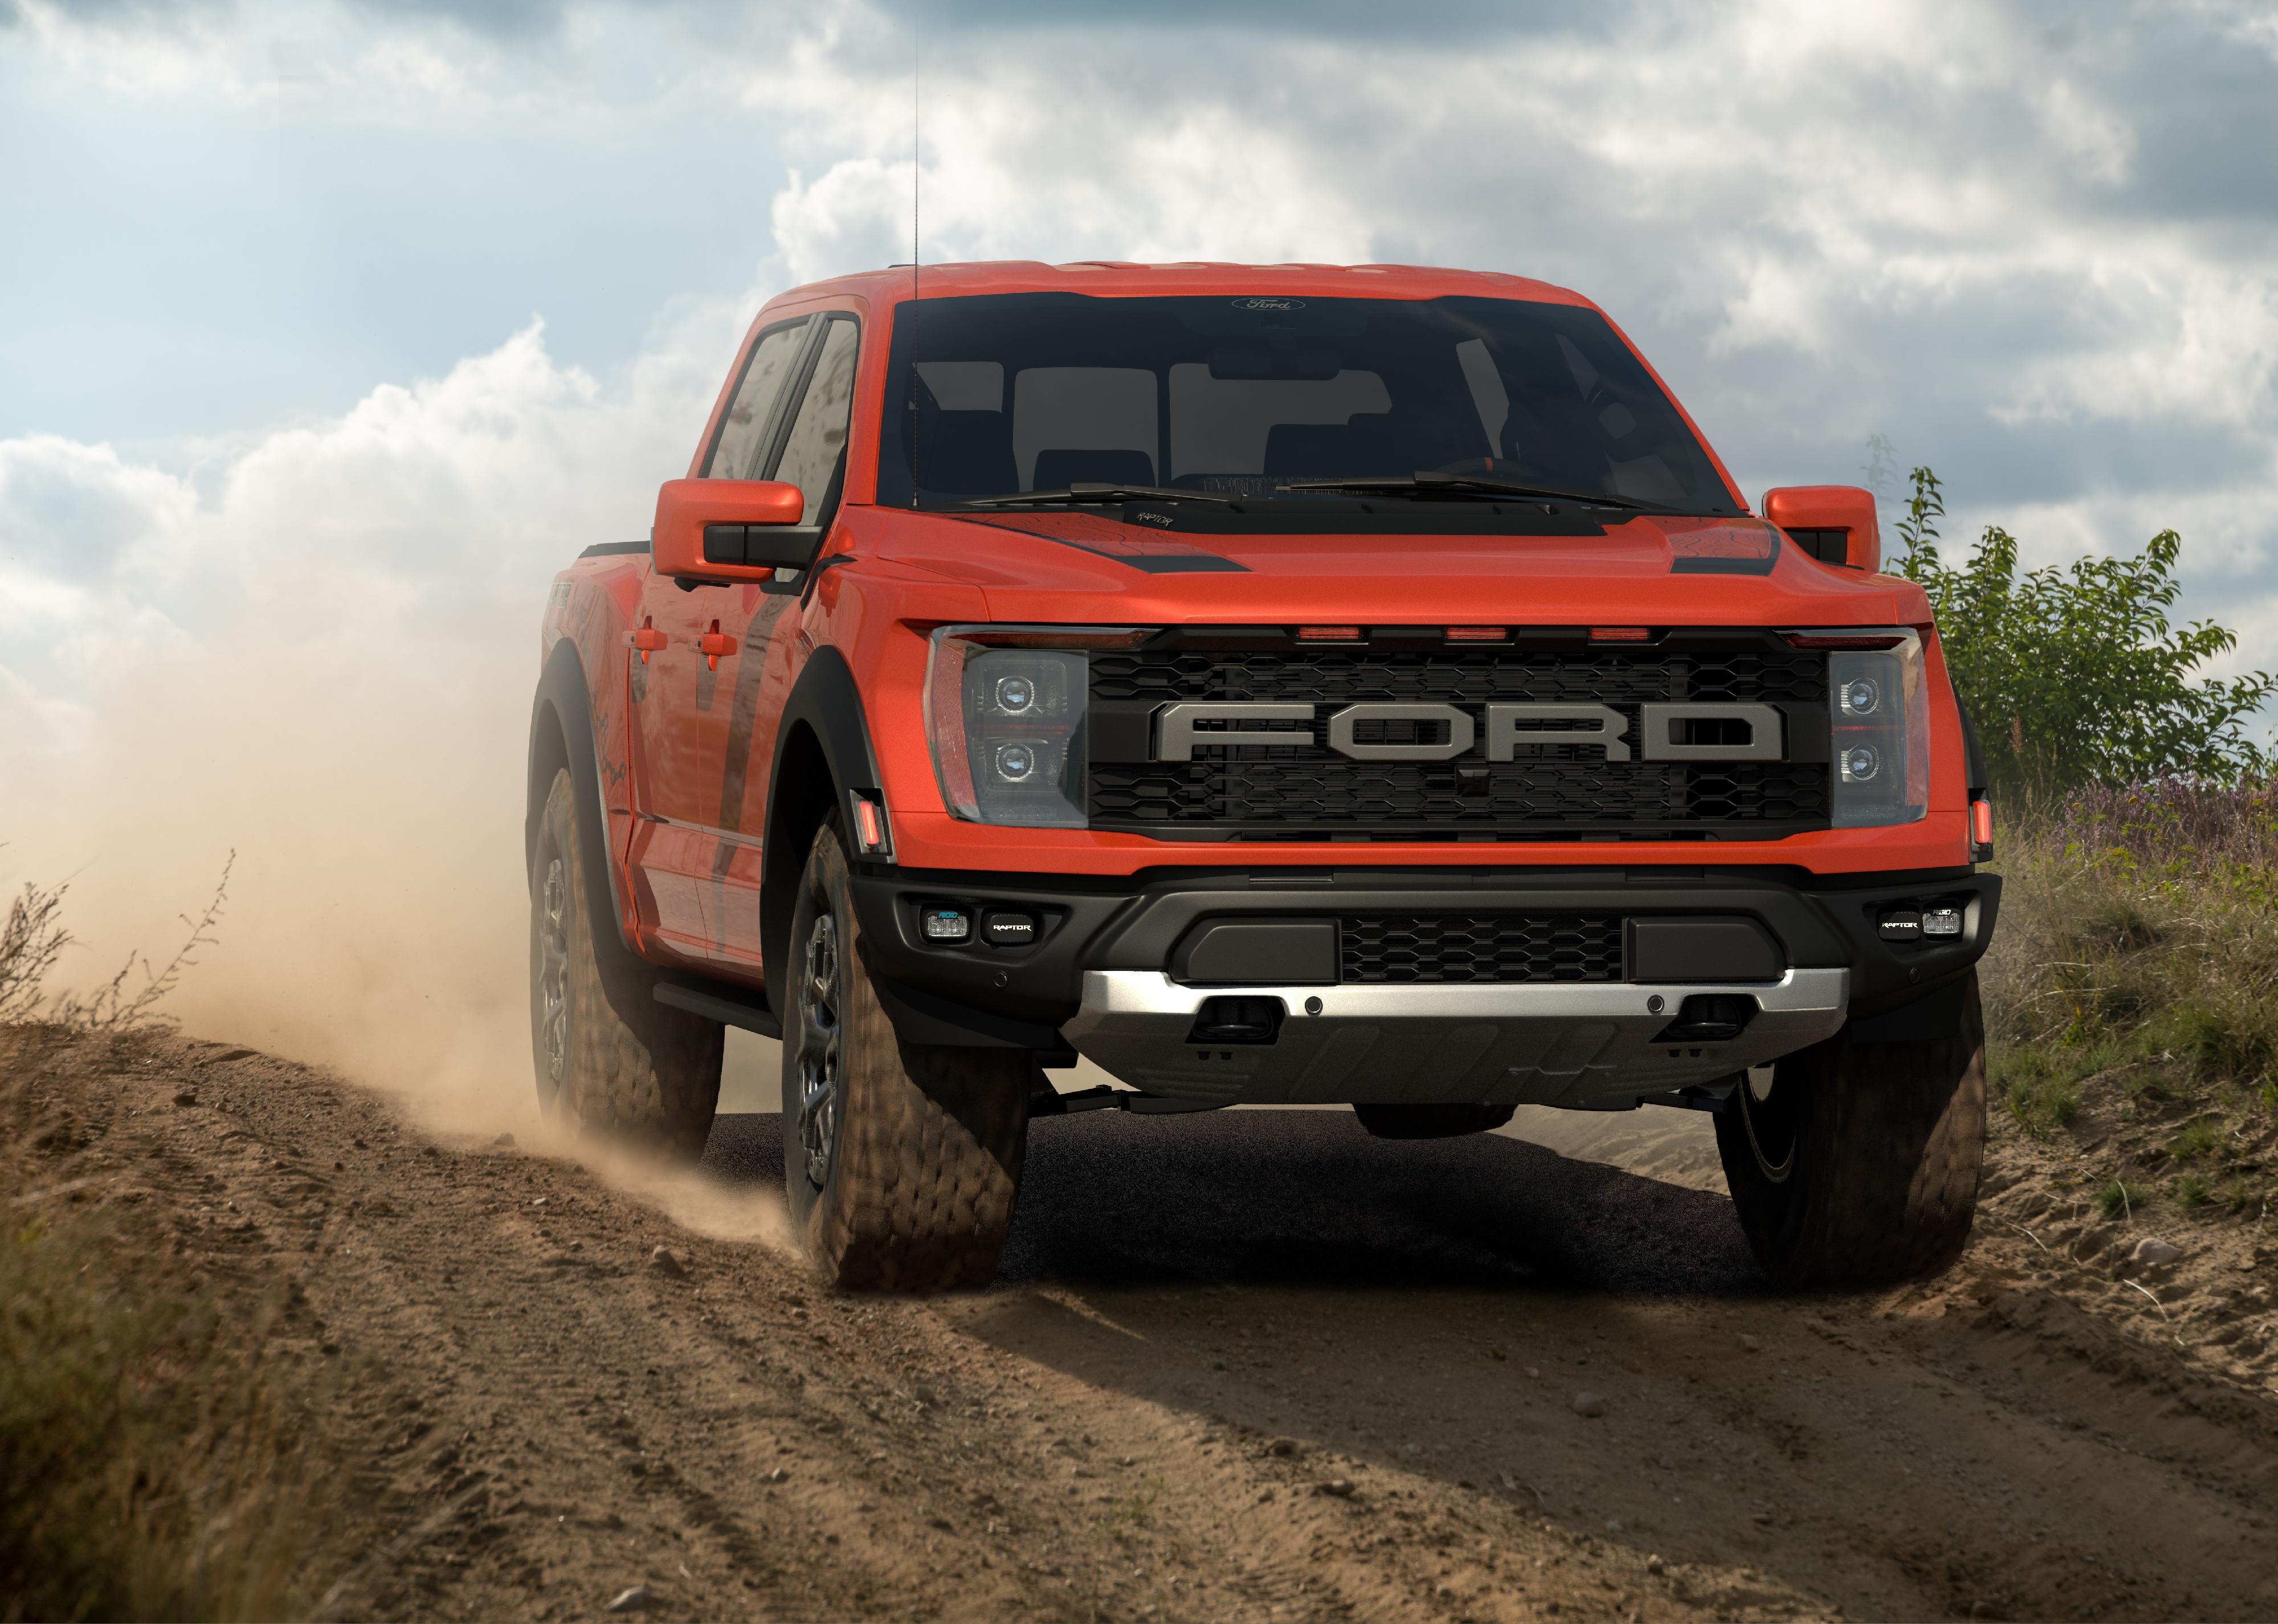 Ford F-150 during fast driving on dirt road.